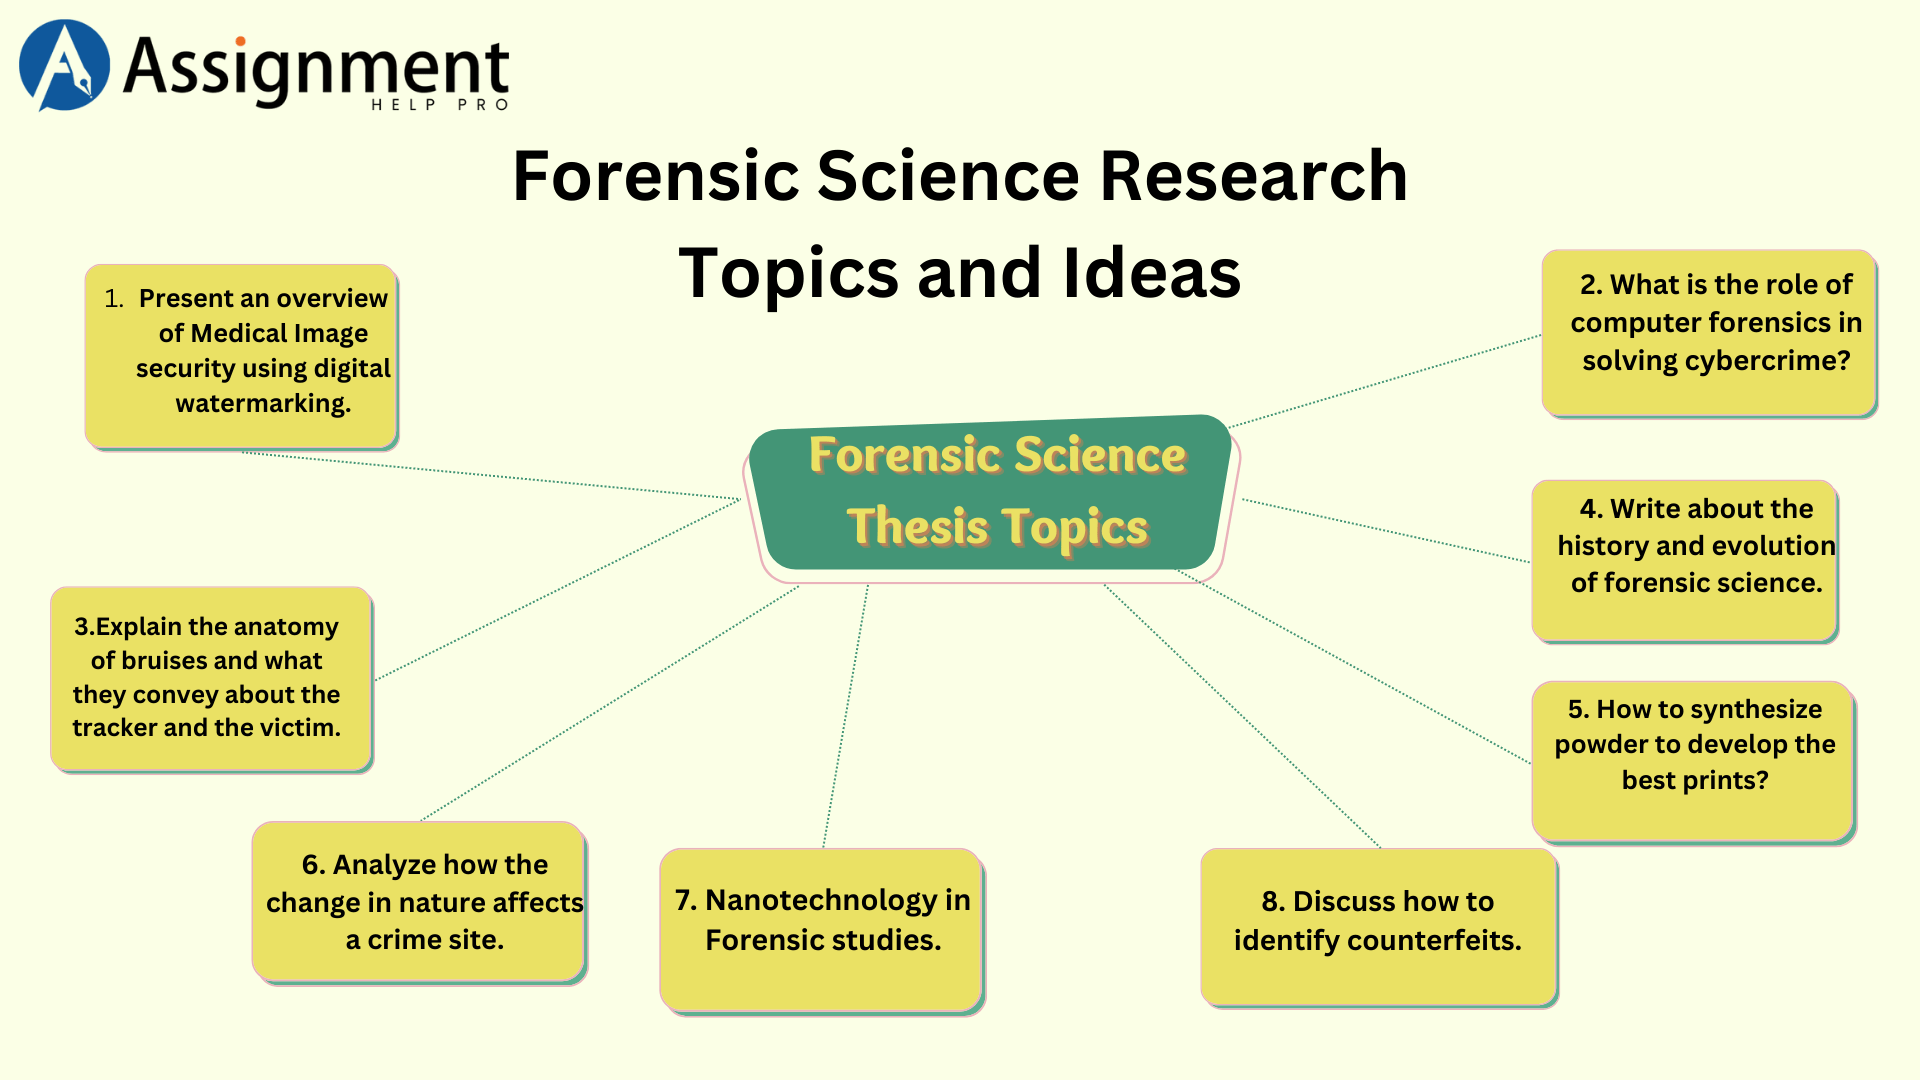 thesis ideas for forensic science